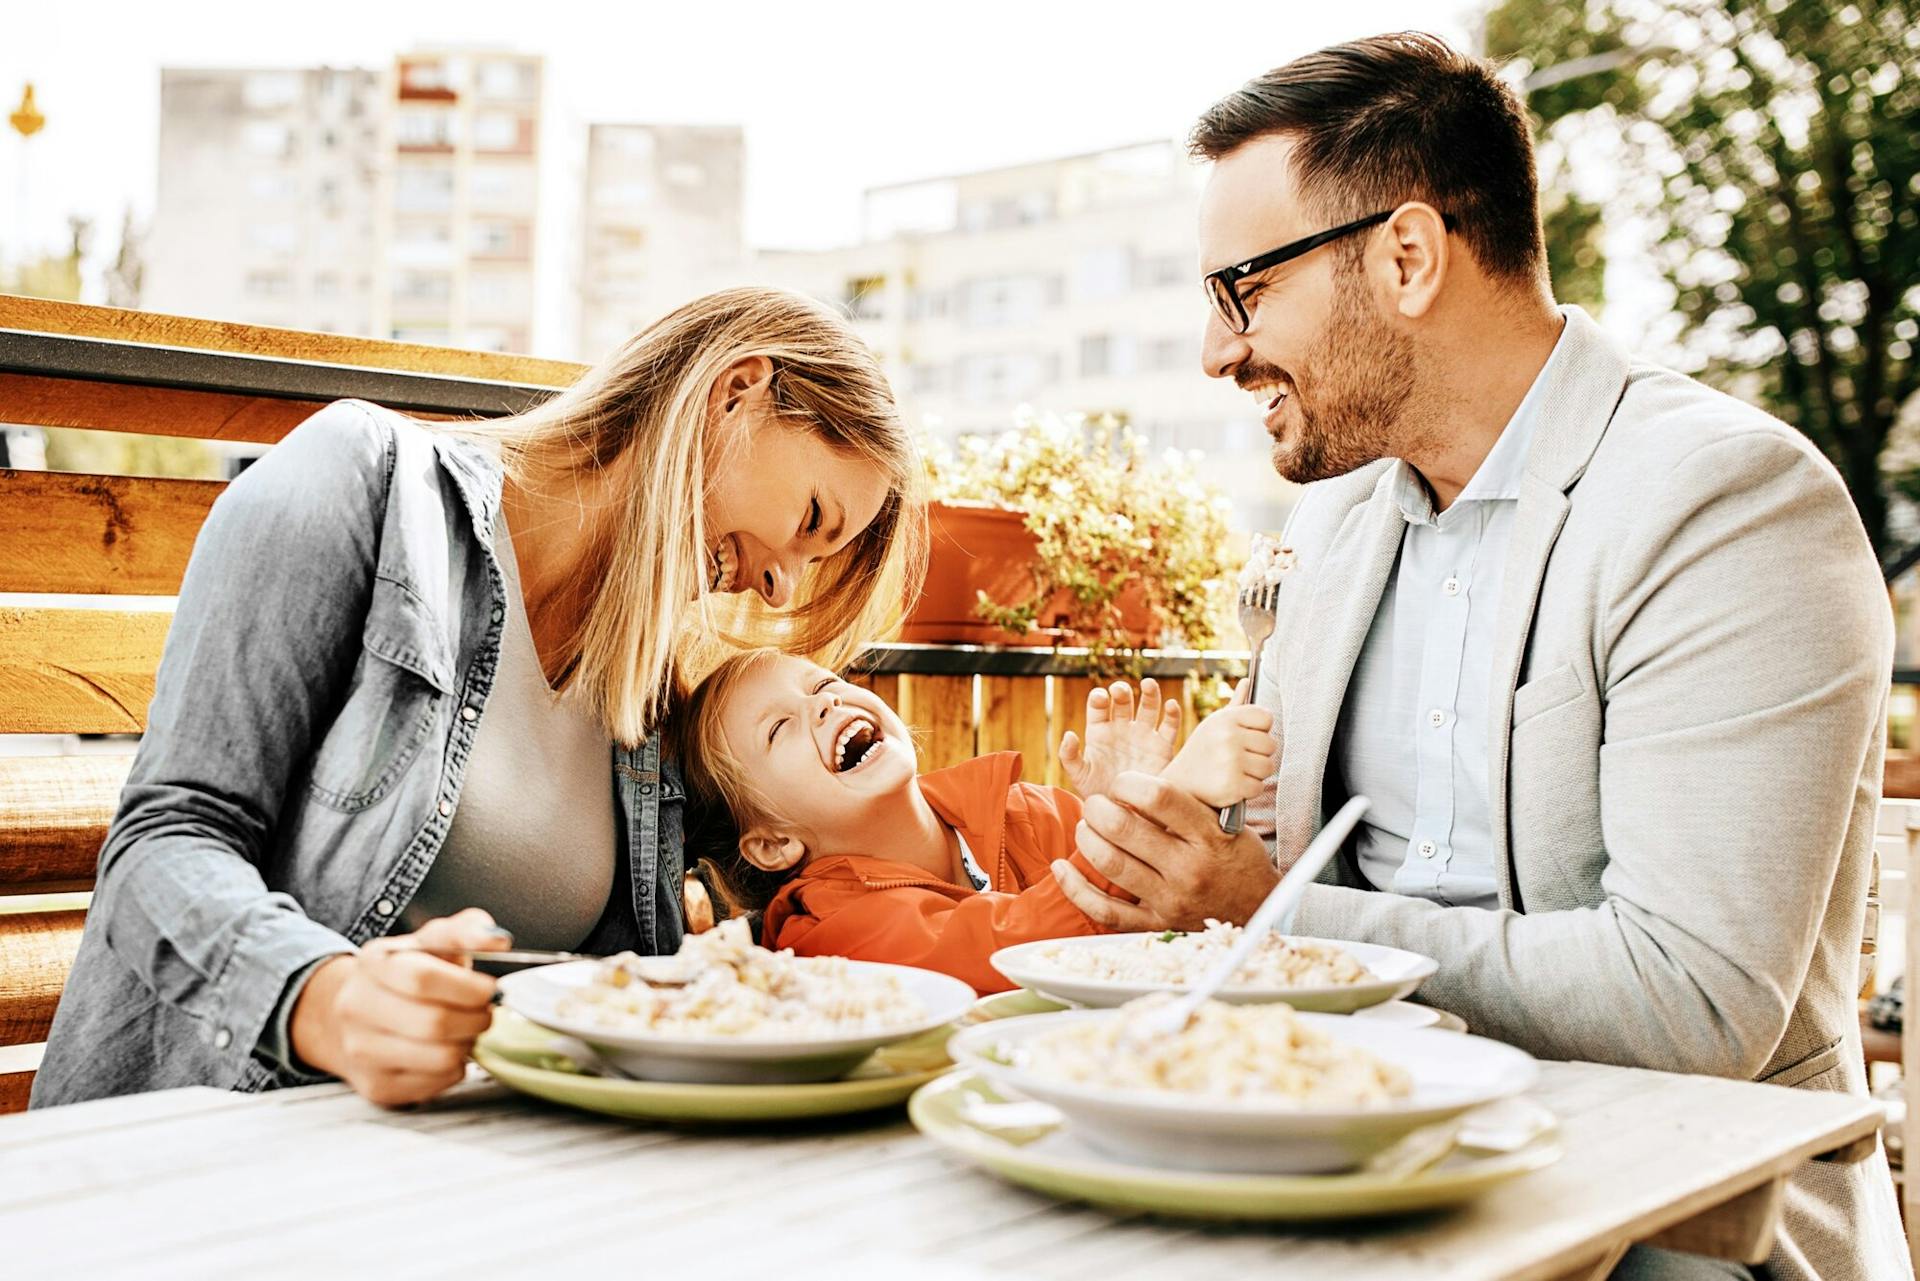 10 Father’s Day Marketing Ideas to Drive Restaurant Revenue